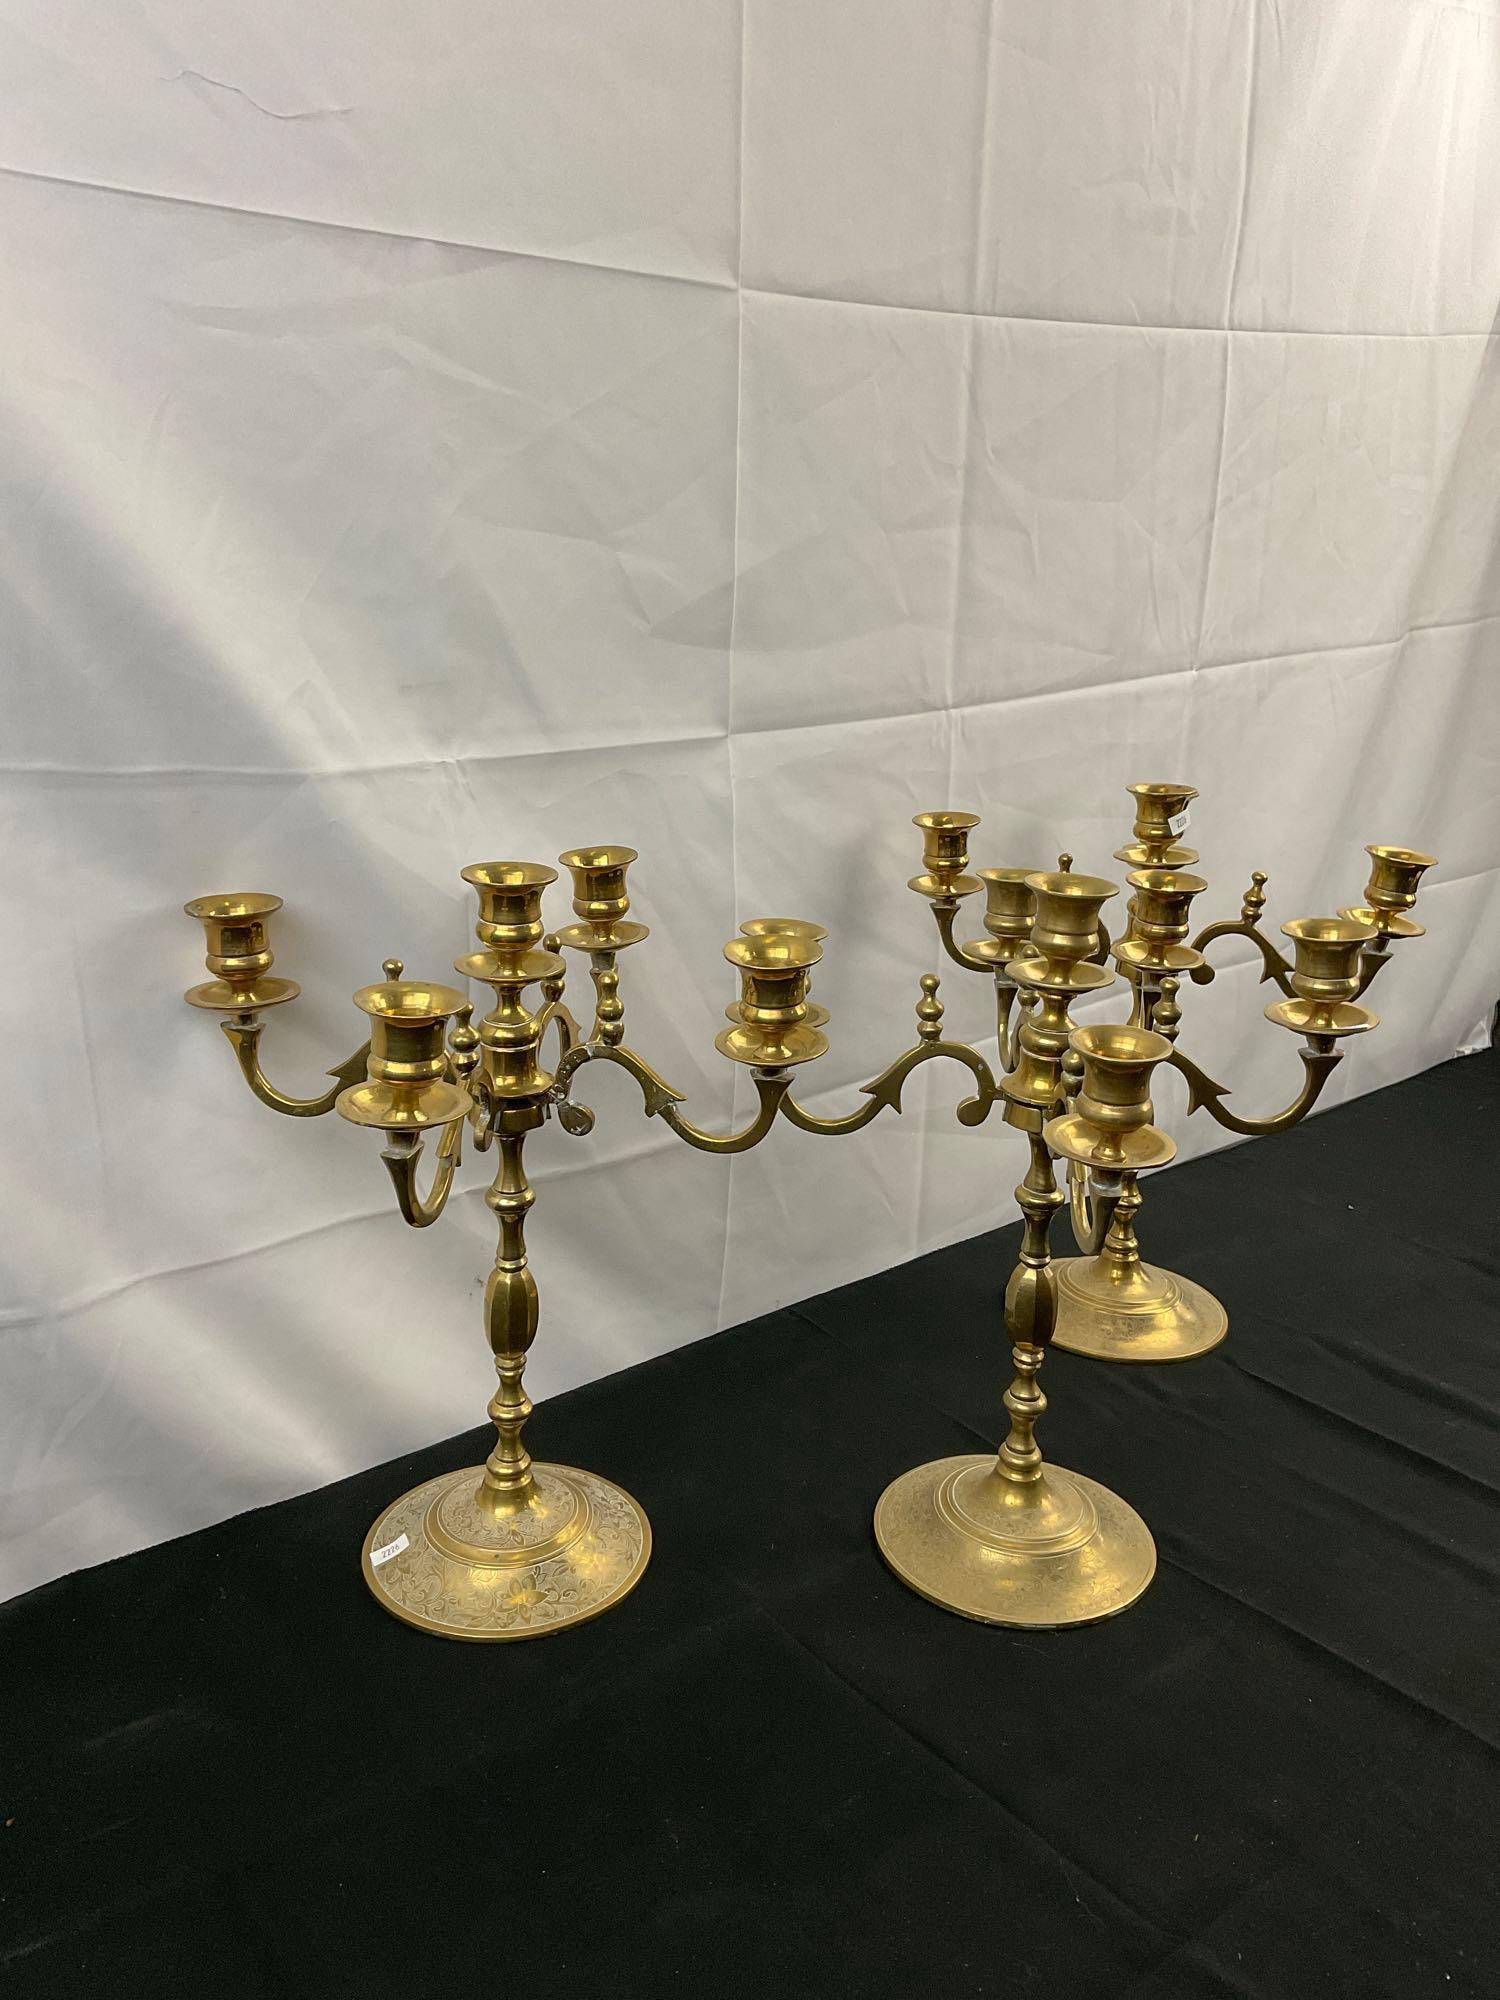 3 pcs Vintage Brass Candelabras, Each w/ 5 Candle Holders. Etched Floral Bases. See pics.